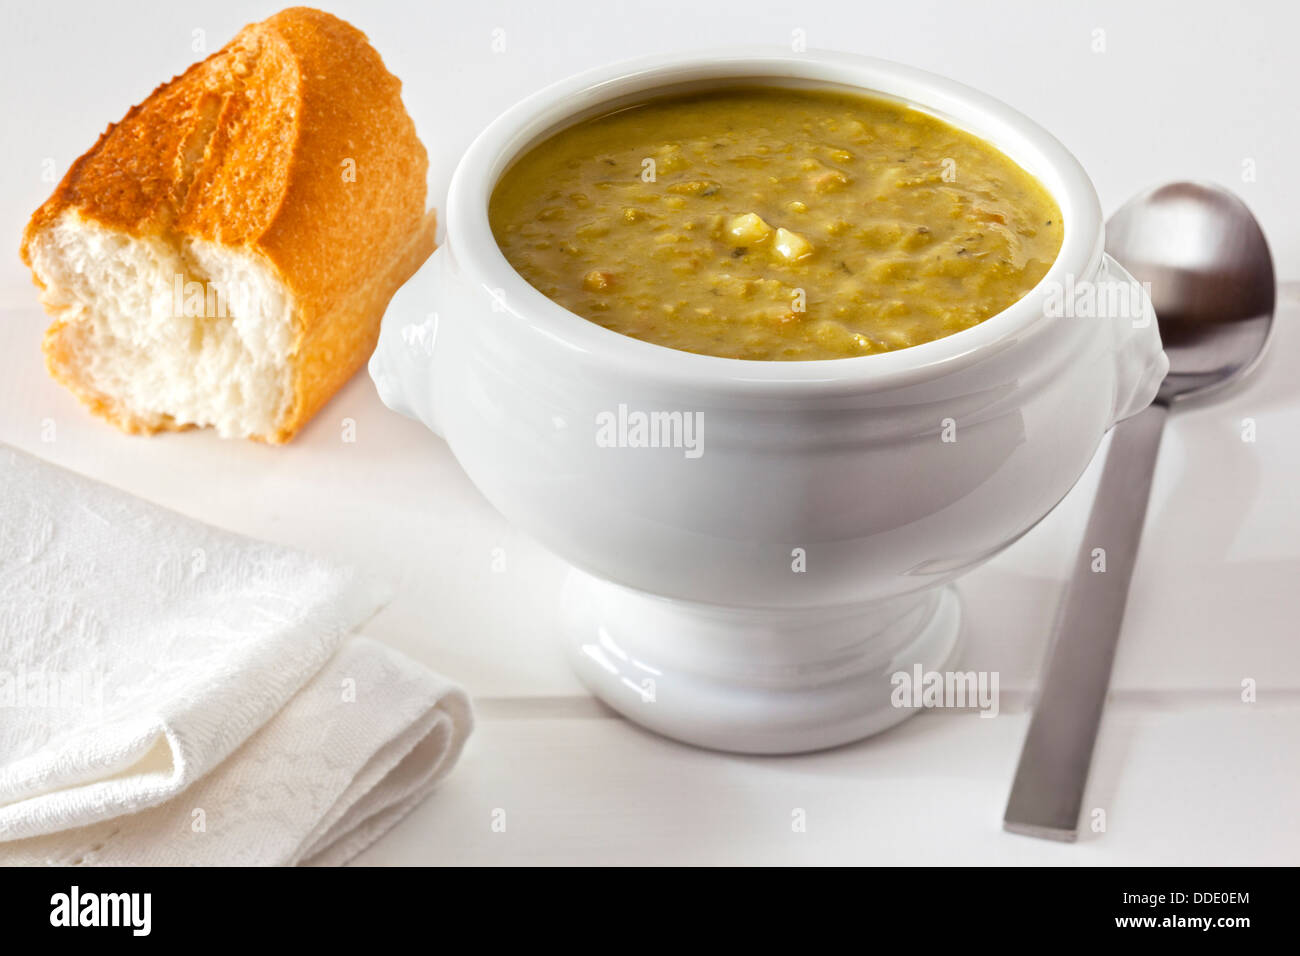 Pea Soup - a bowl of thick and hearty pea soup with a chunk of custy bread. Stock Photo